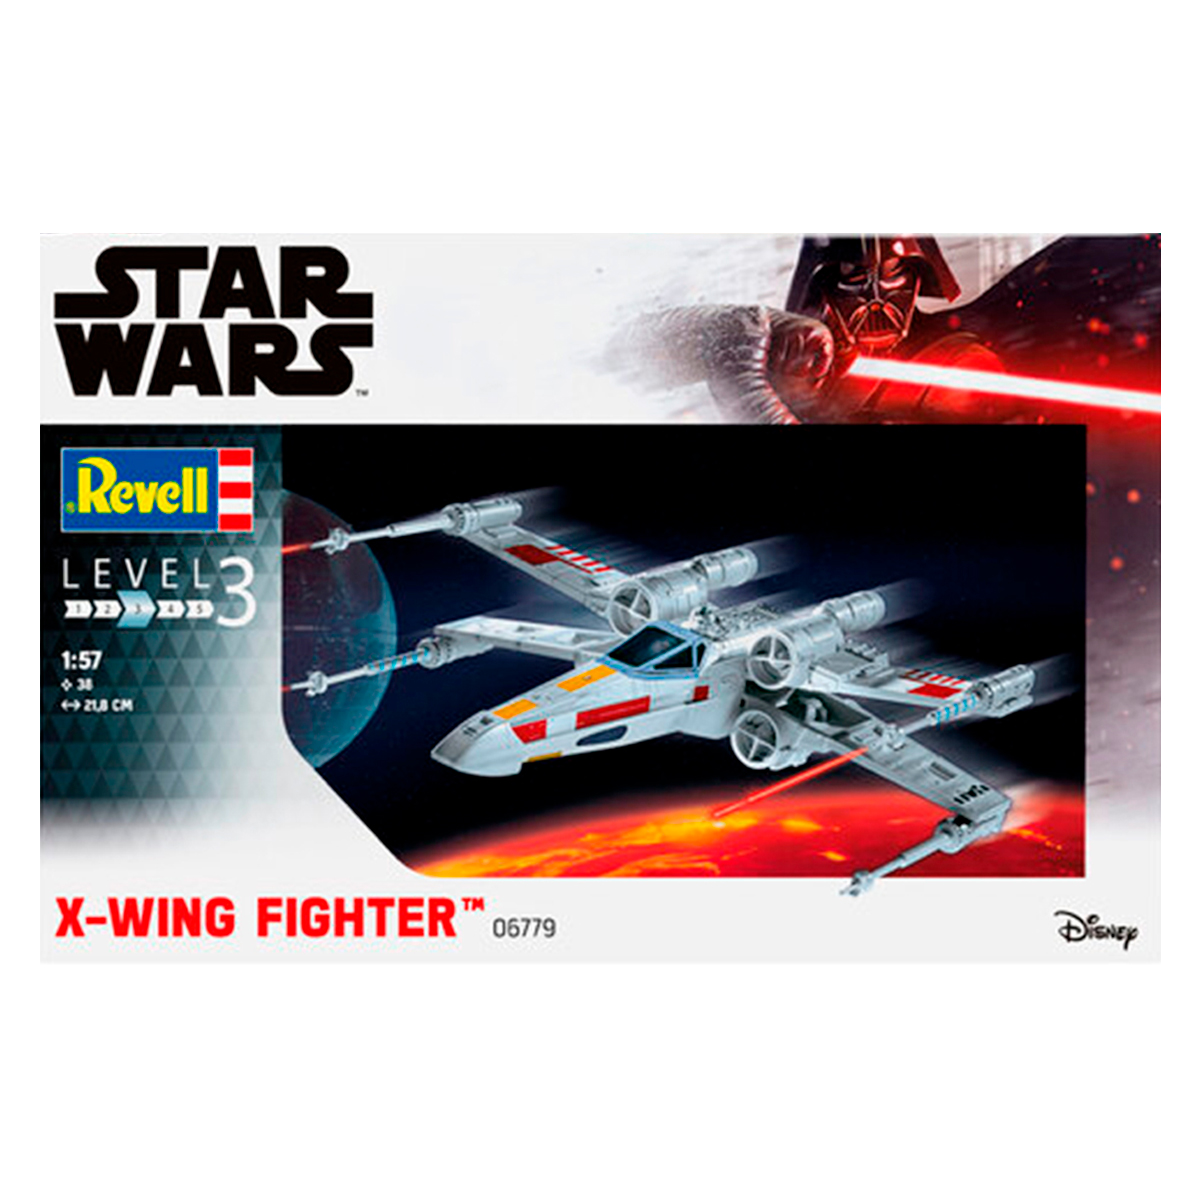 X-Wing Fighter 1/57